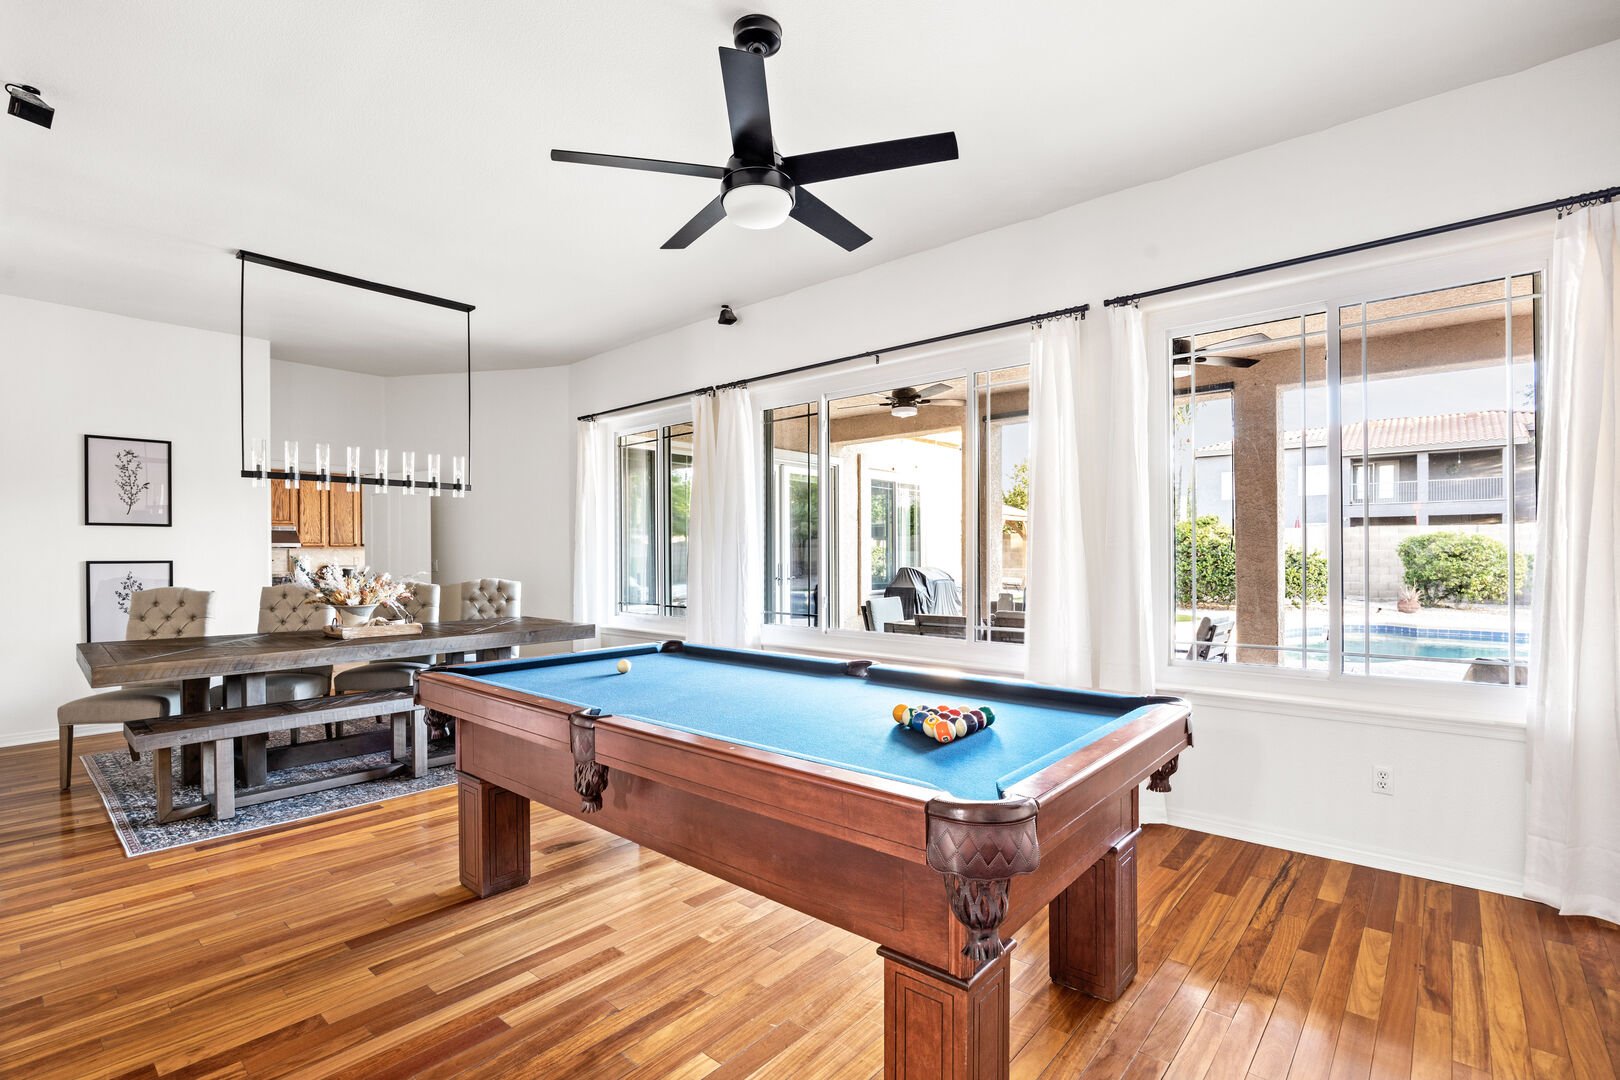 Pool Table w/ Dining Area in Background